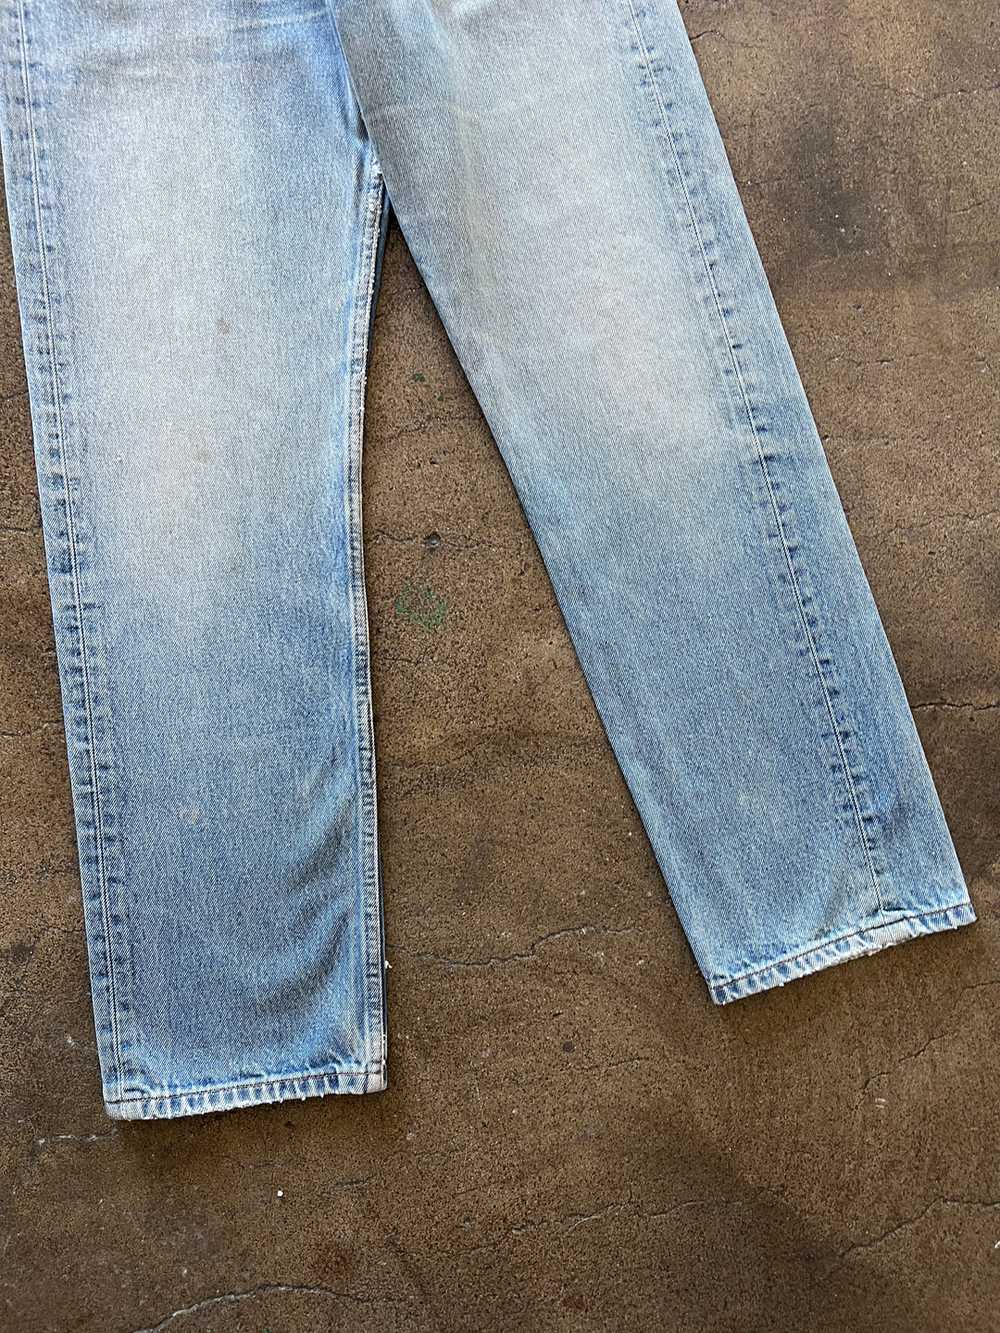 2000s Levi's 501 Jeans Faded 29" x 29" - image 3